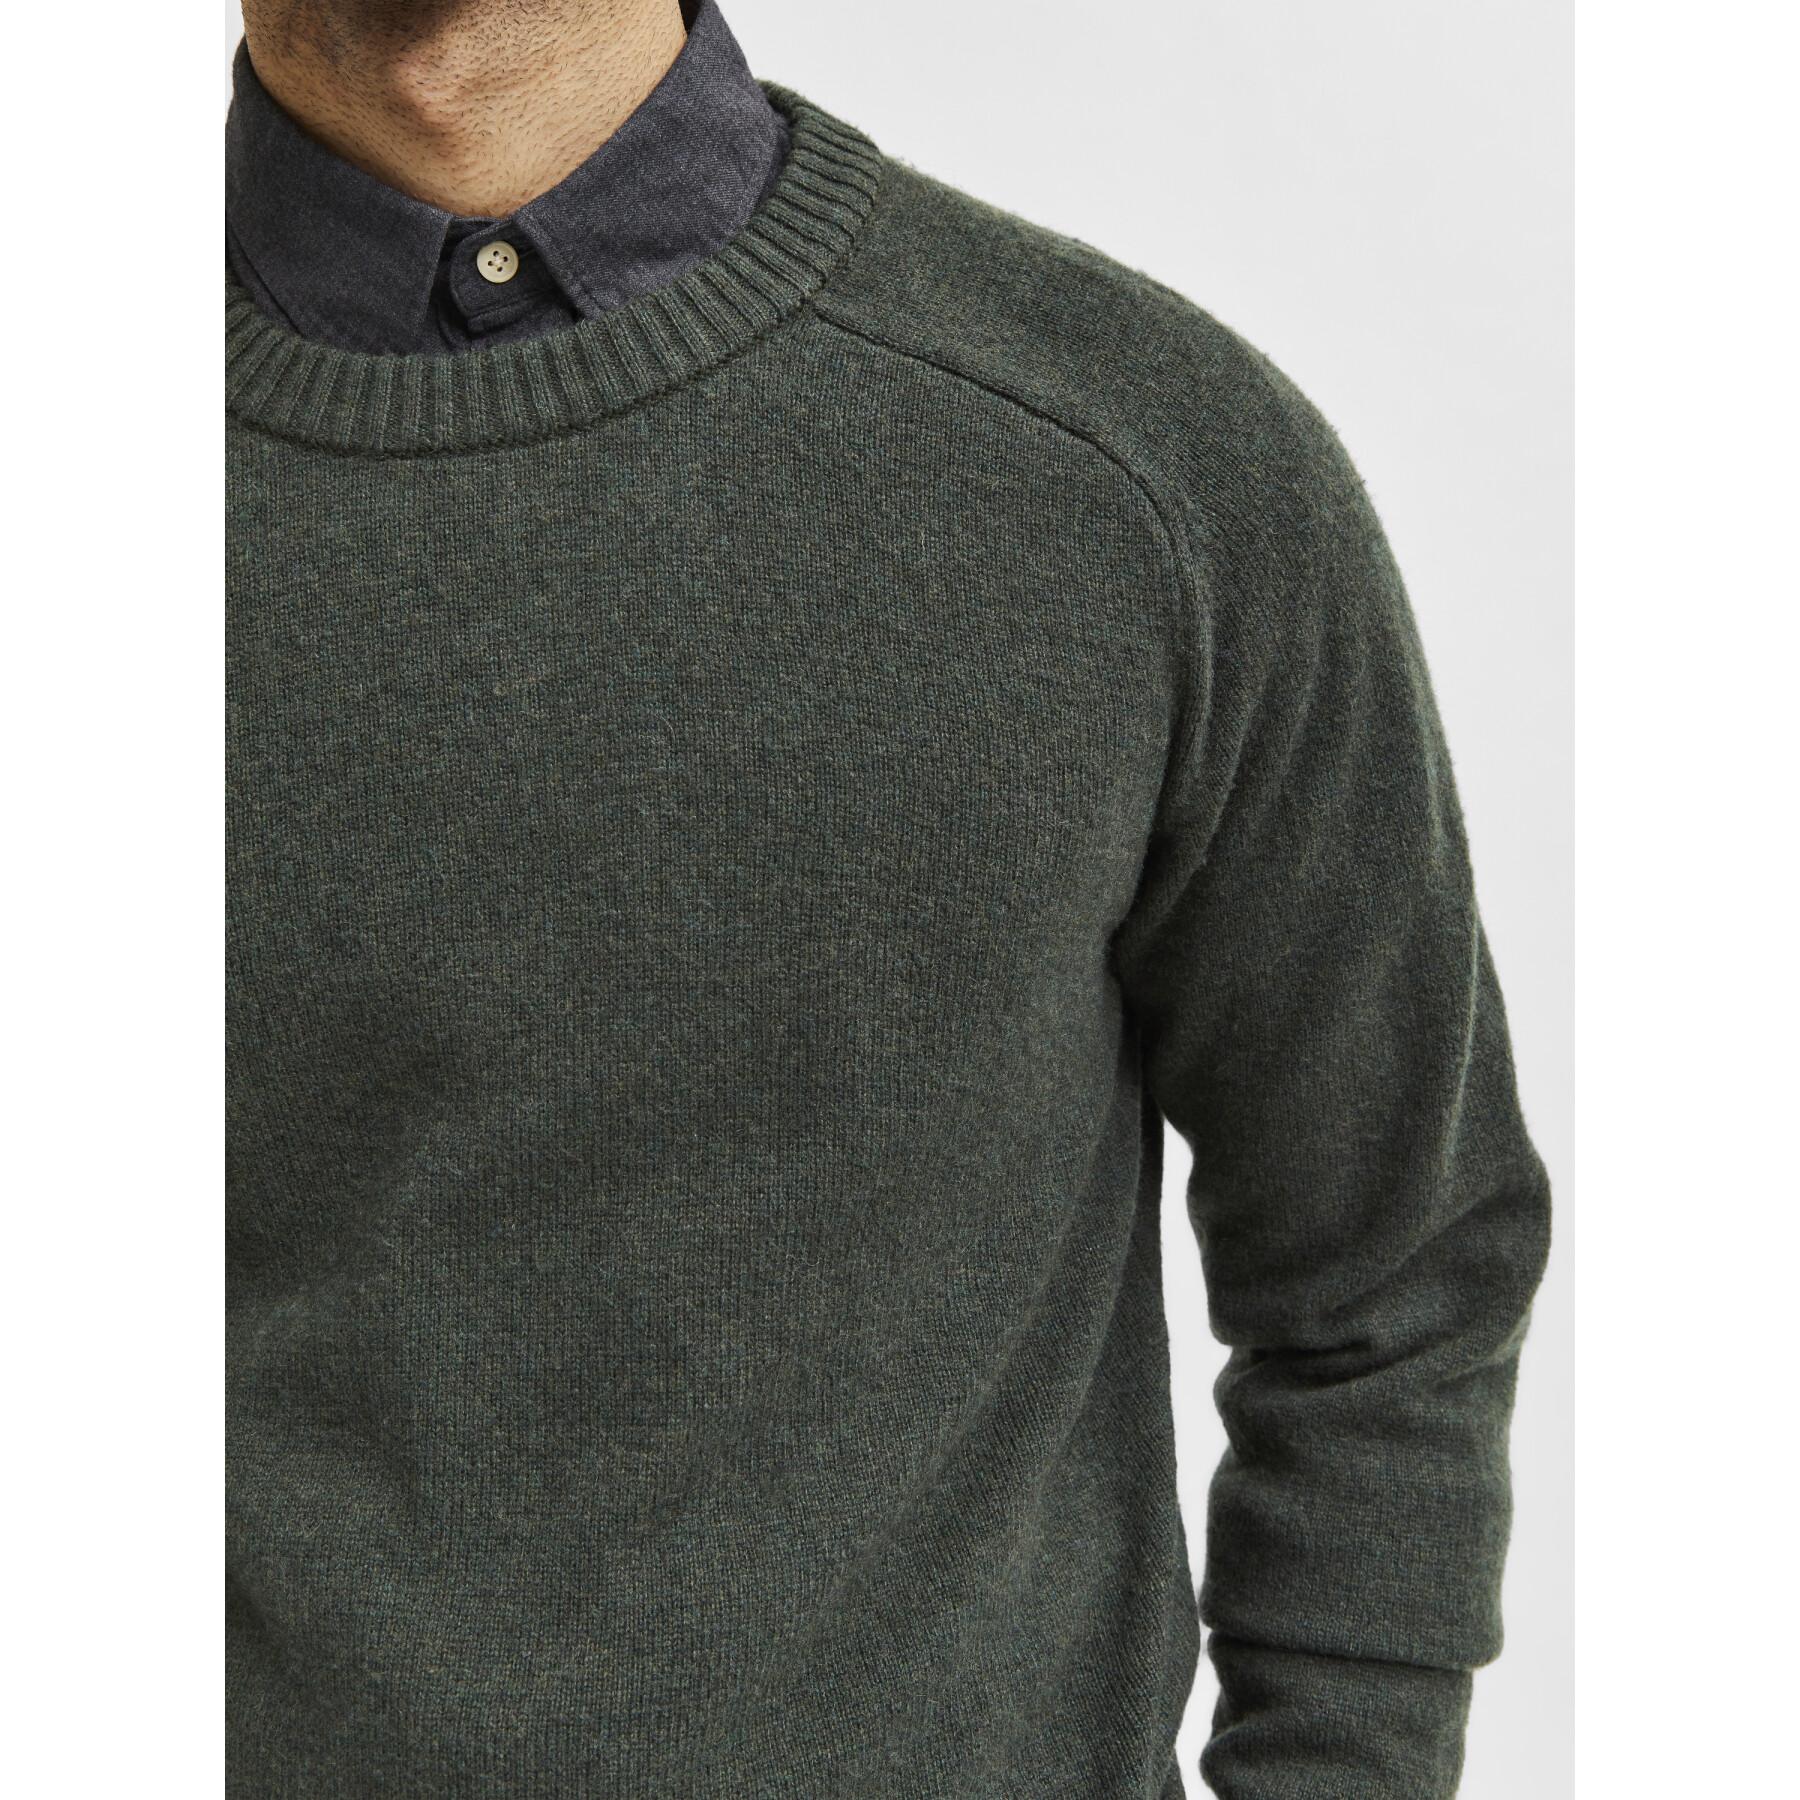 Jumper Selected Newcoban lambs wool col rond